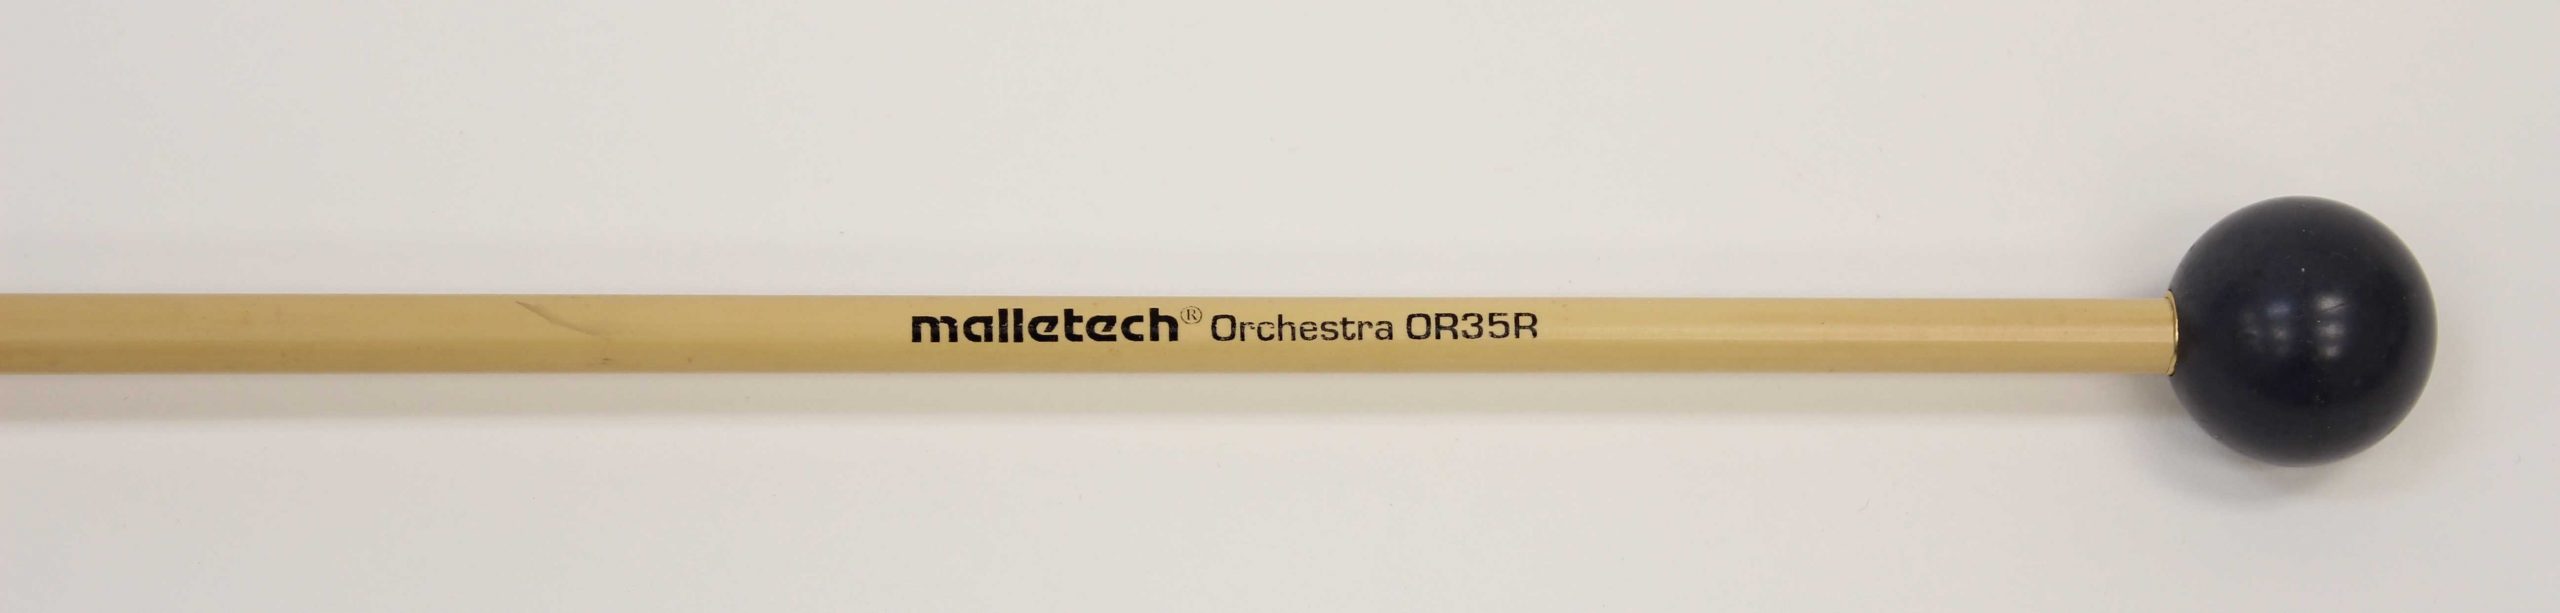 Malletech OR35R Orchestral Series Xylophone Mallets